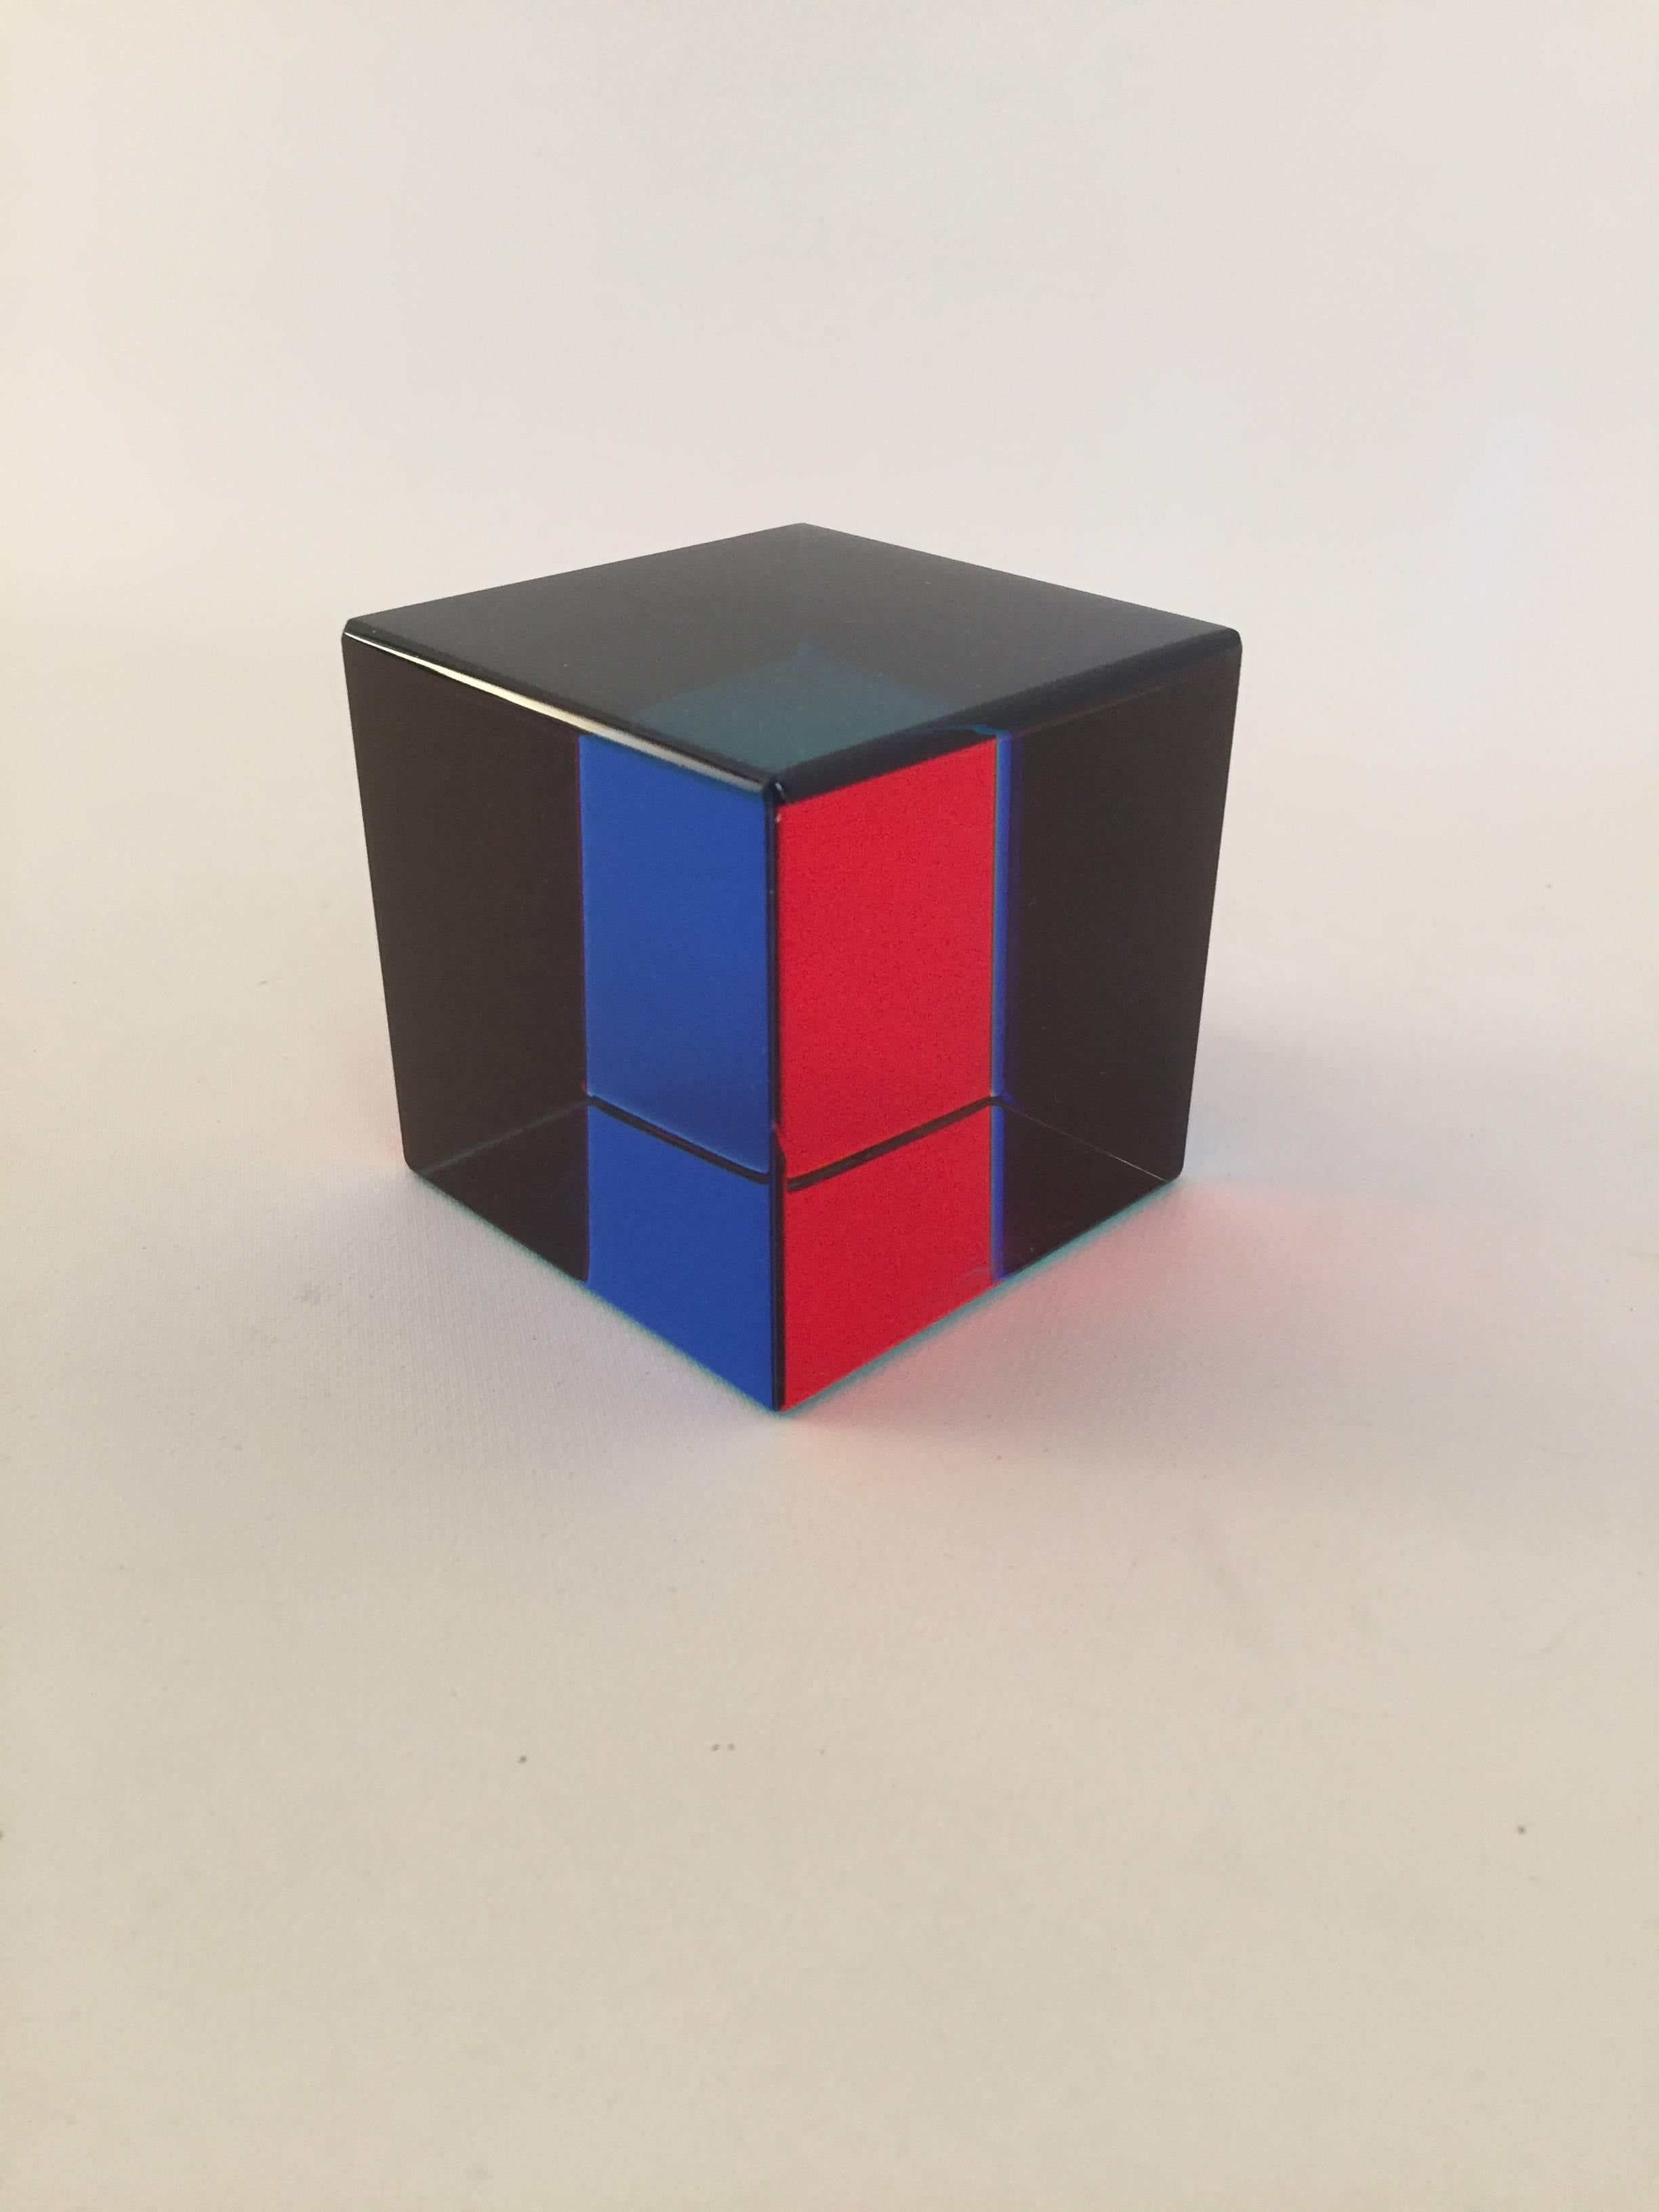 Op Art acrylic cube designed by Yugoslavian artist, Vasa Mihich. Signed and dated, Vasa 2000. Change the viewing angle, change the optical experience. The colors range from black, red, blue and teal.